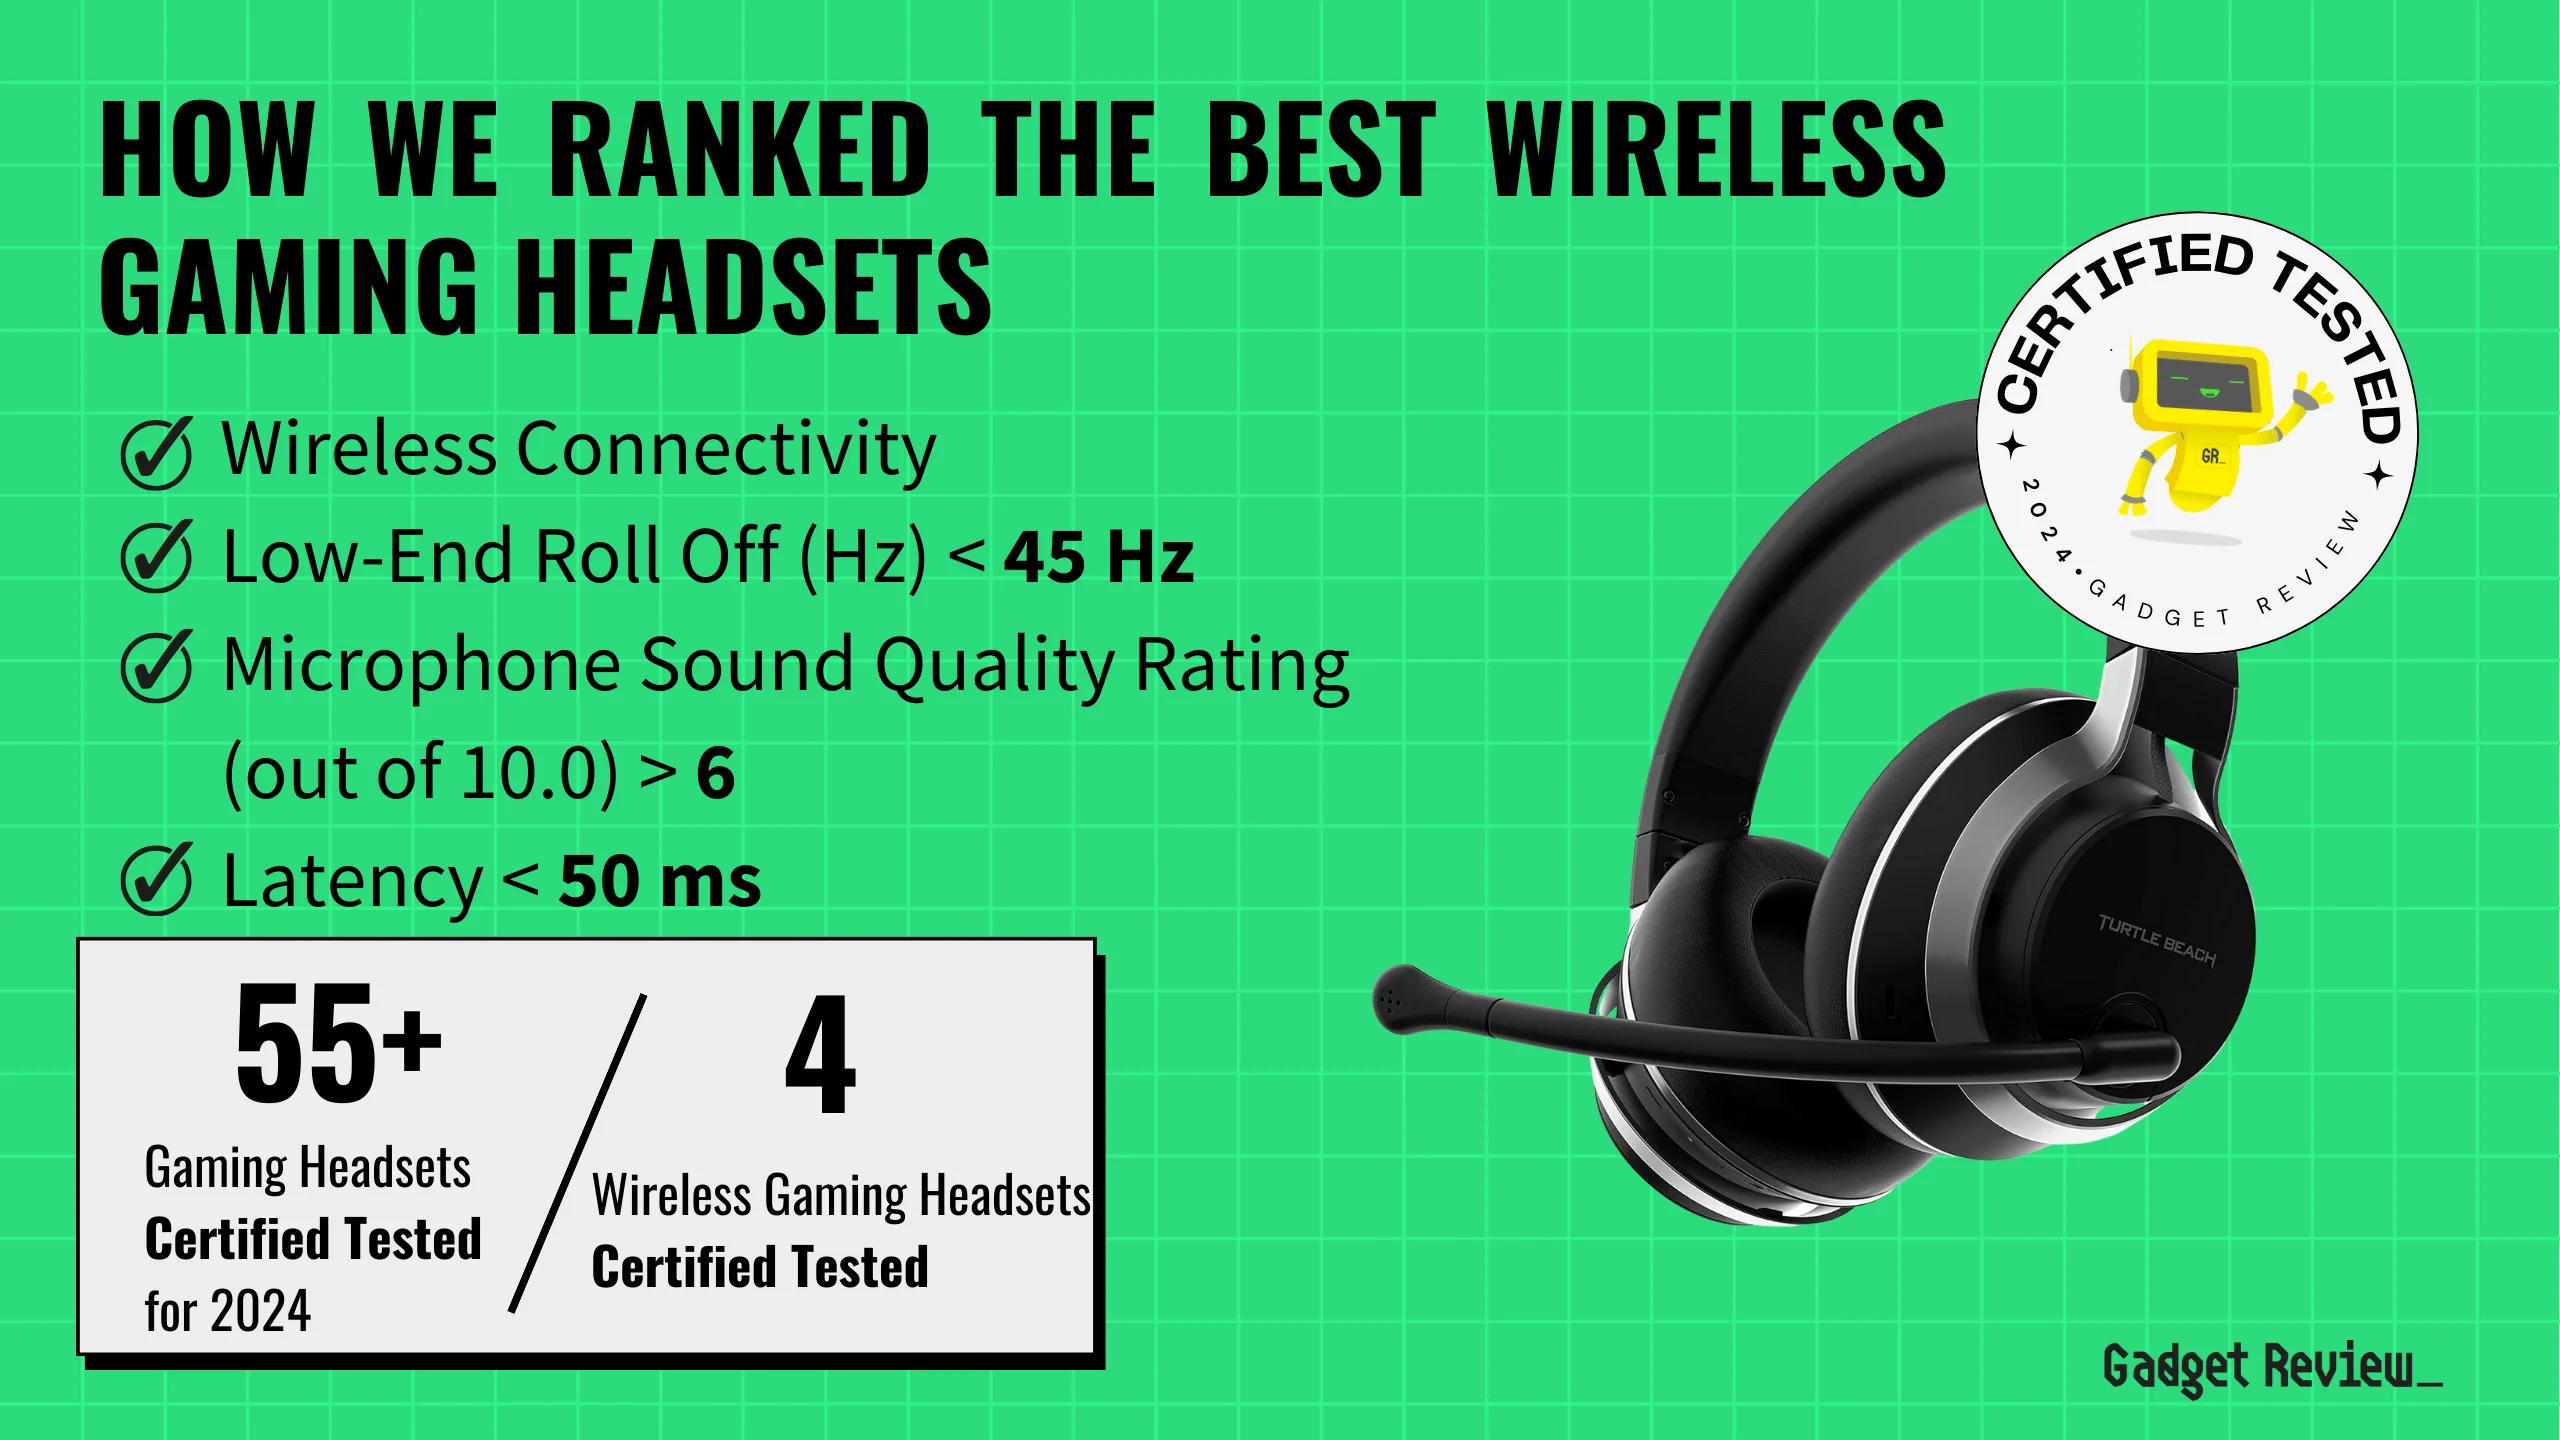 best wireless gaming headset guide that shows the top best gaming headset model